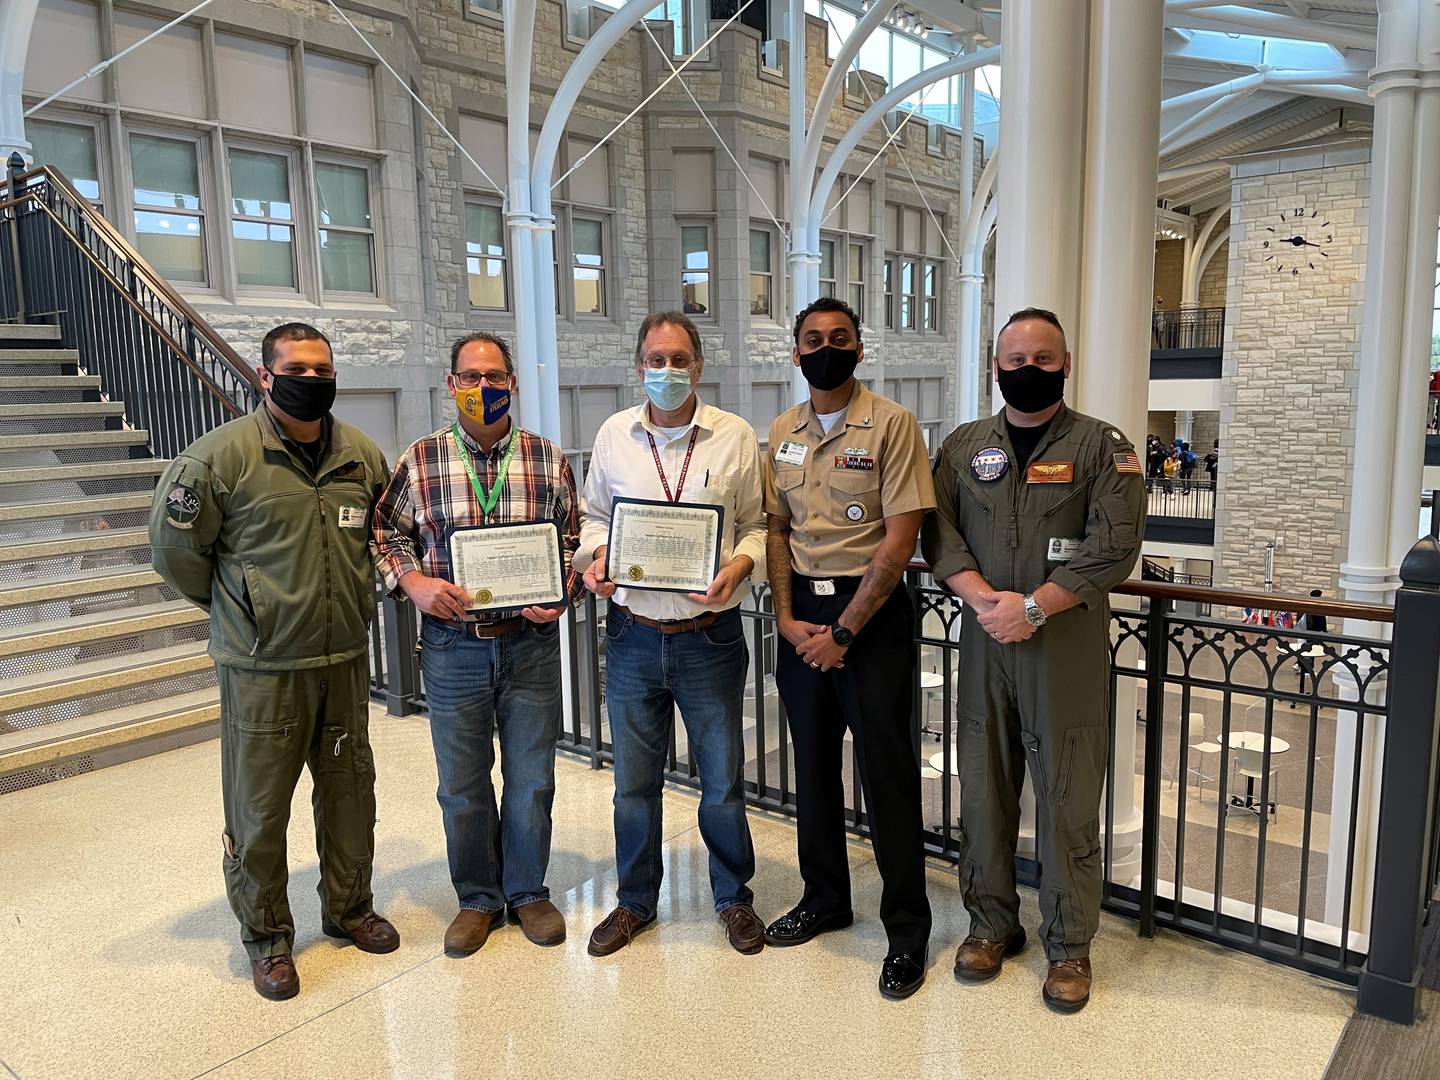 The Navy recognized Milton George and Tim Gyrgiel, teachers in Joliet Central’s Career and technical education (CTE) department, with its Navy Impact Influencer Award. Pictured are CDR Matthew Roy, Joliet Central CTE teacher Tim Gyrgiel, Joliet Central CTE teacher Milton George, Petty Officer Beyer and CDR Matthew Sass.